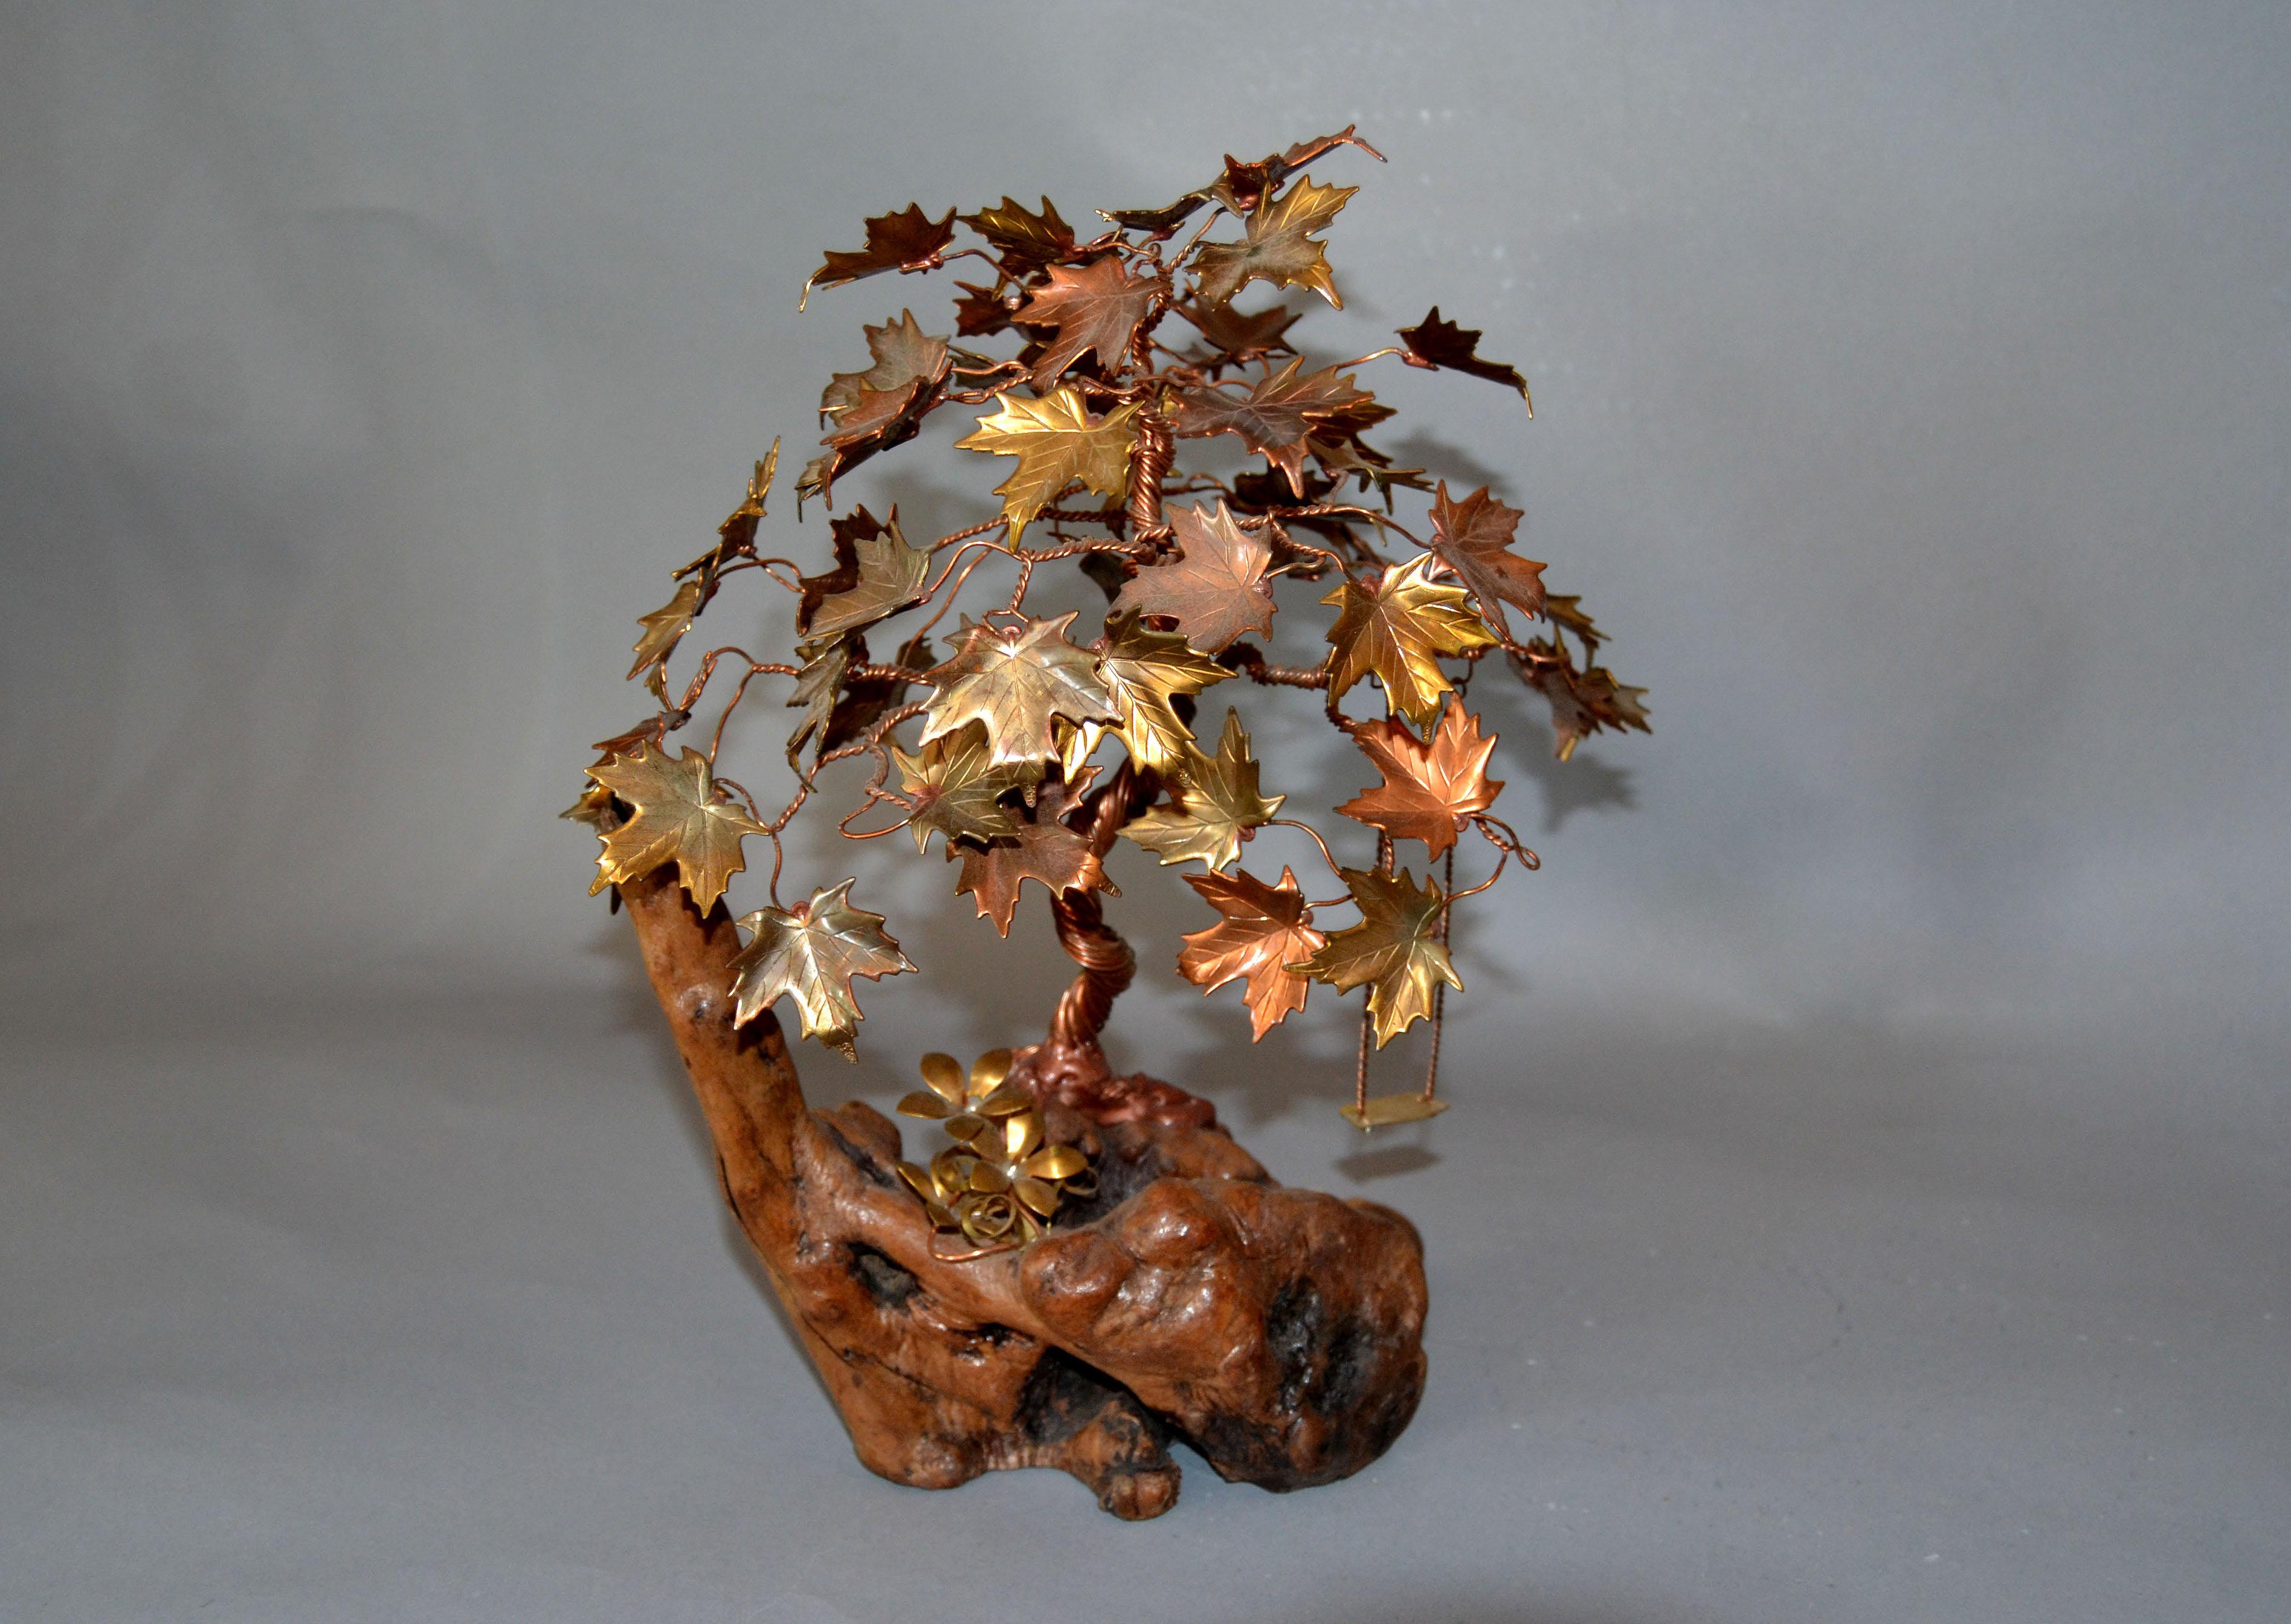 Organic Modern Handcrafted Bonsai Tree Sculpture in Brass Copper Bronze on a Burl Wood Base For Sale